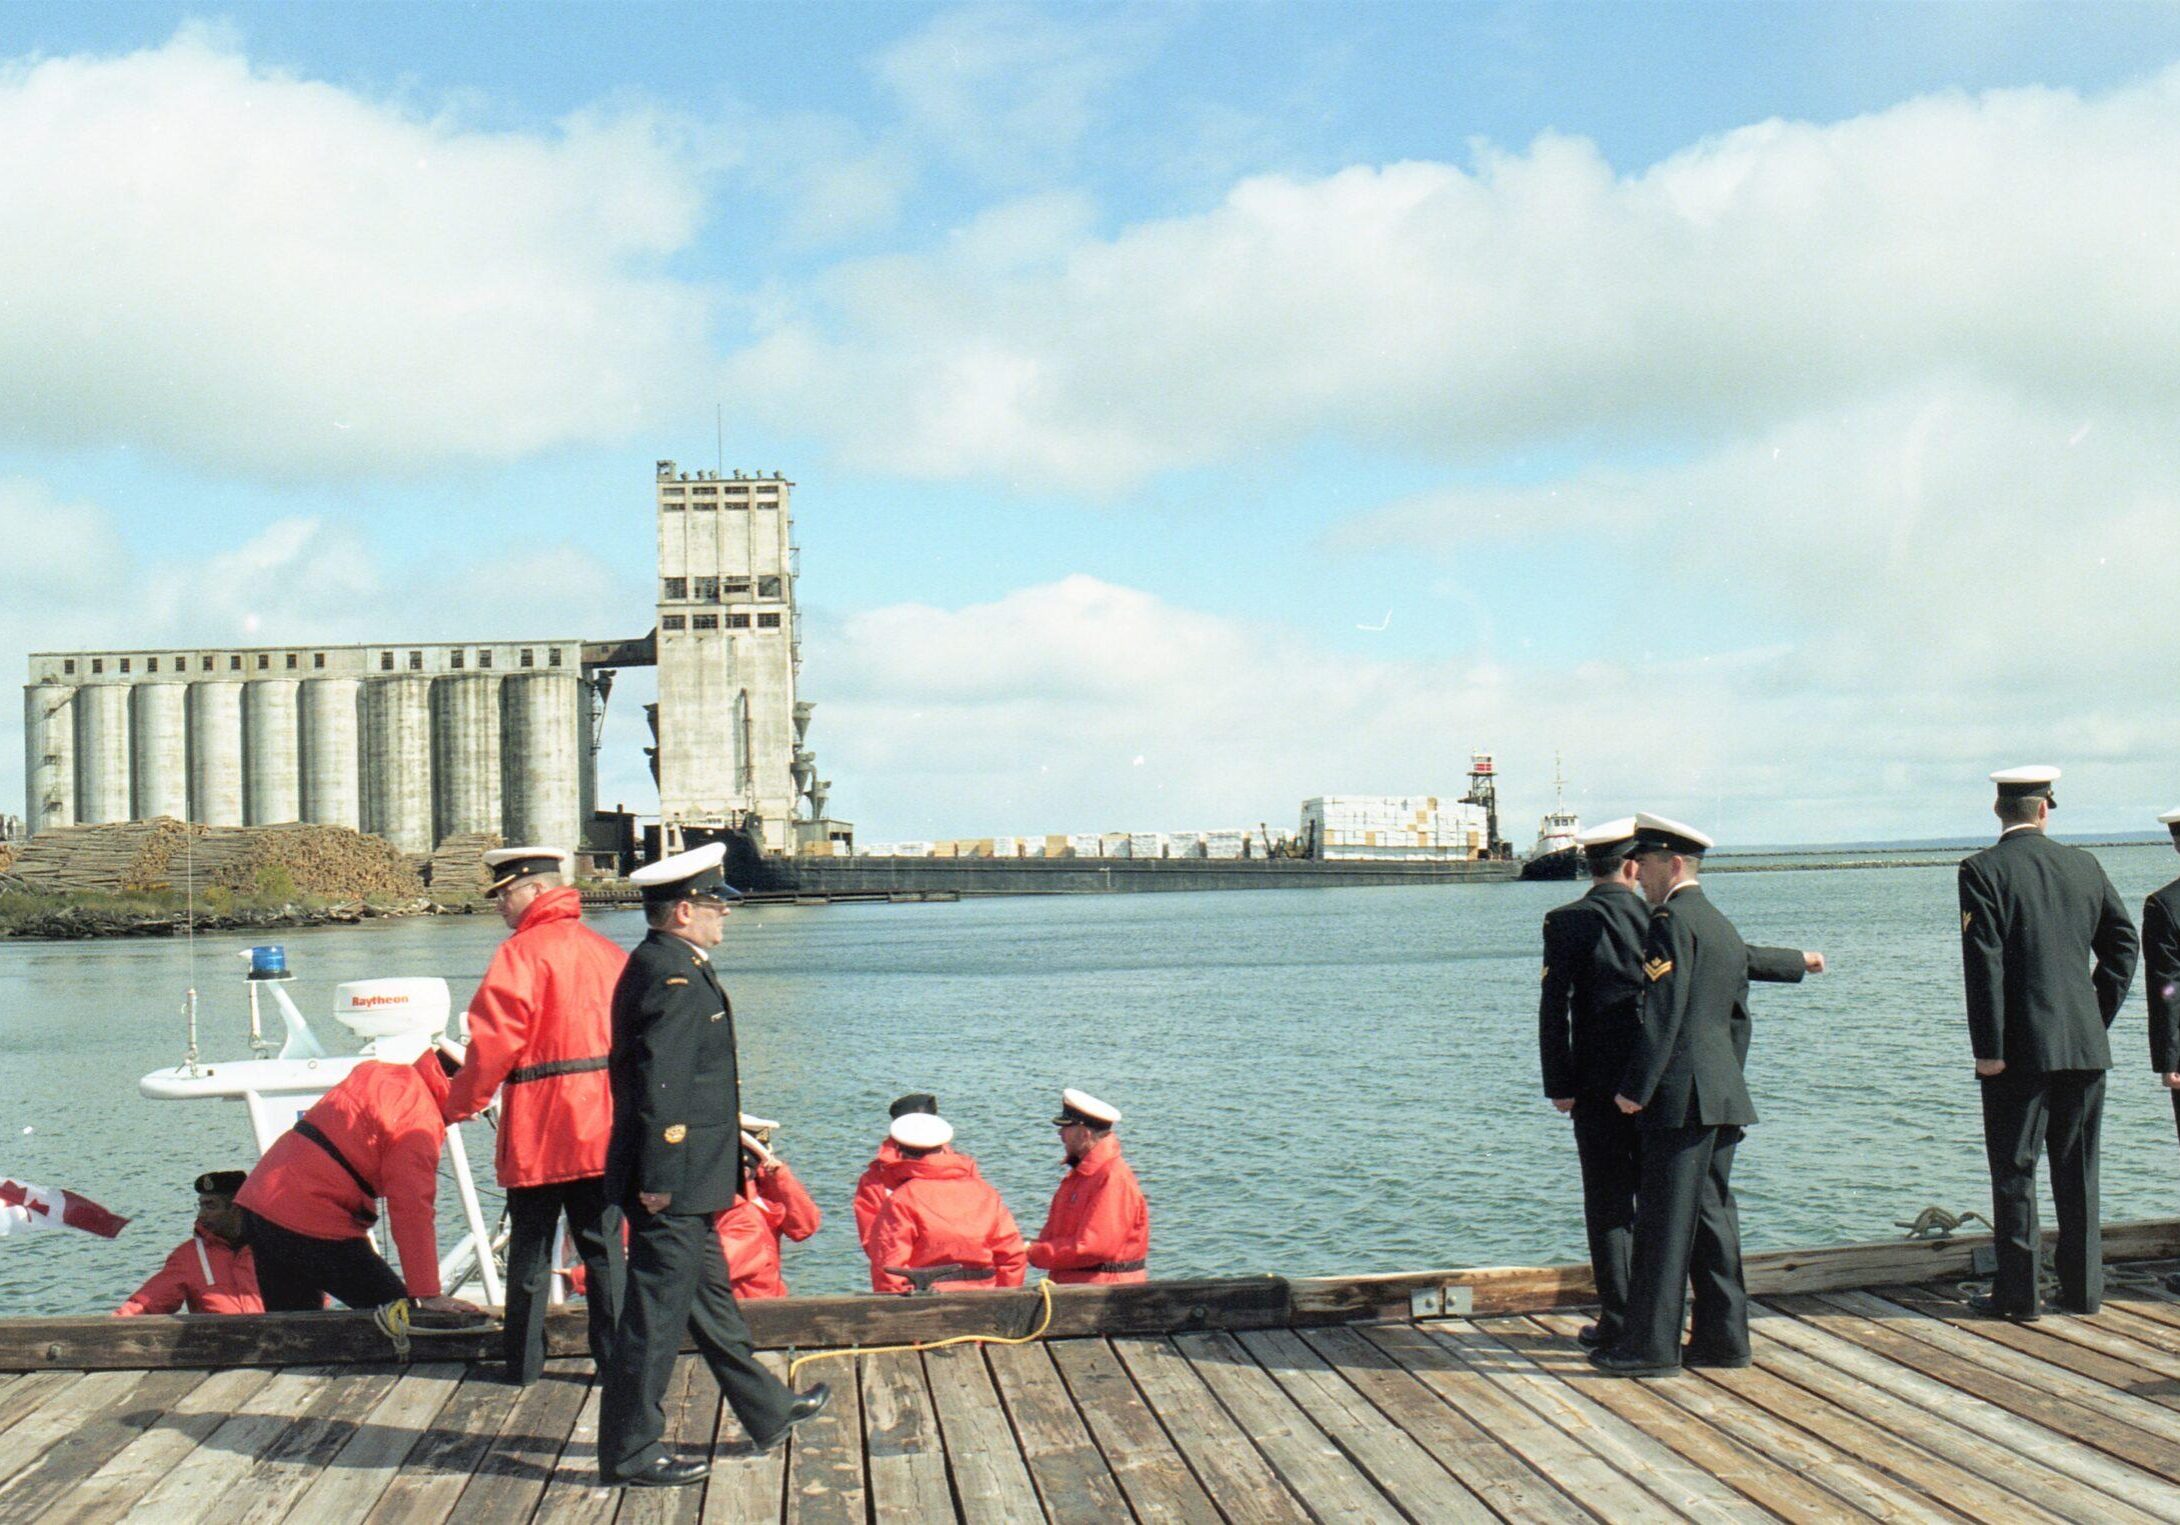 changing of commands on dock - multiple captians and shipmen standing upon the dock with the port and elevator in the background